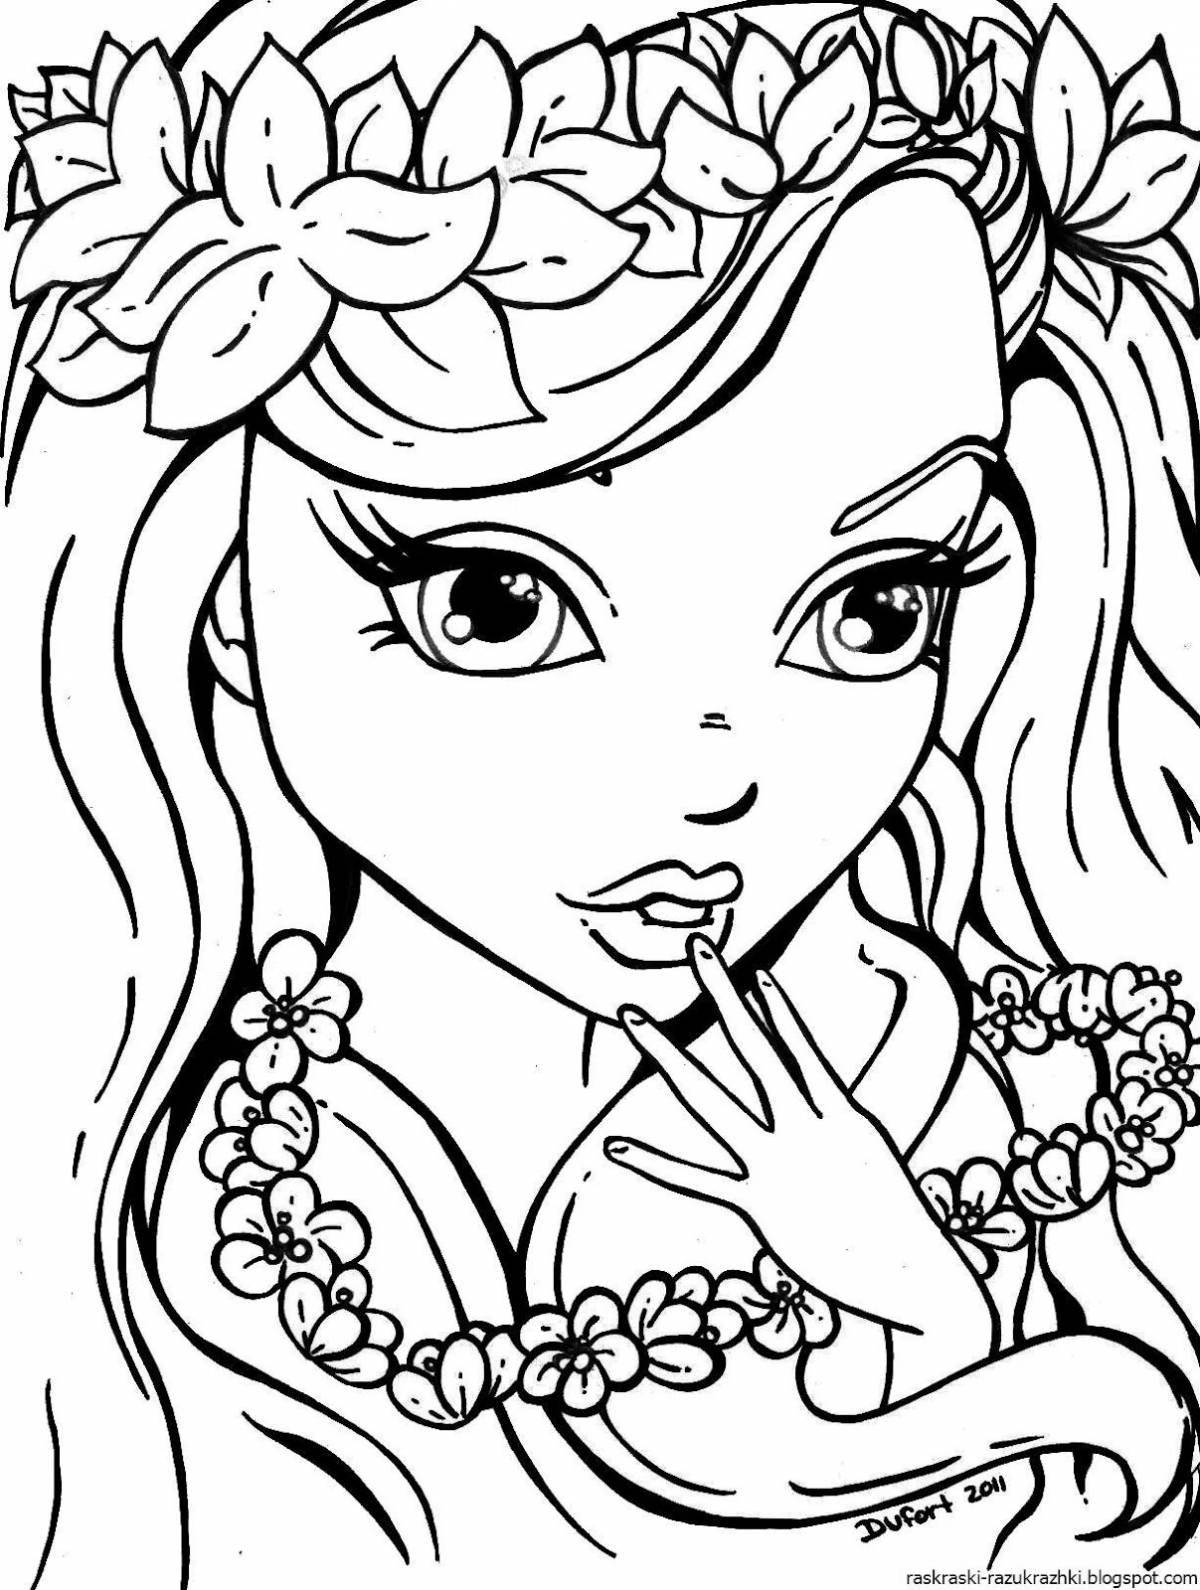 Coloring book for girls 5-7 years old